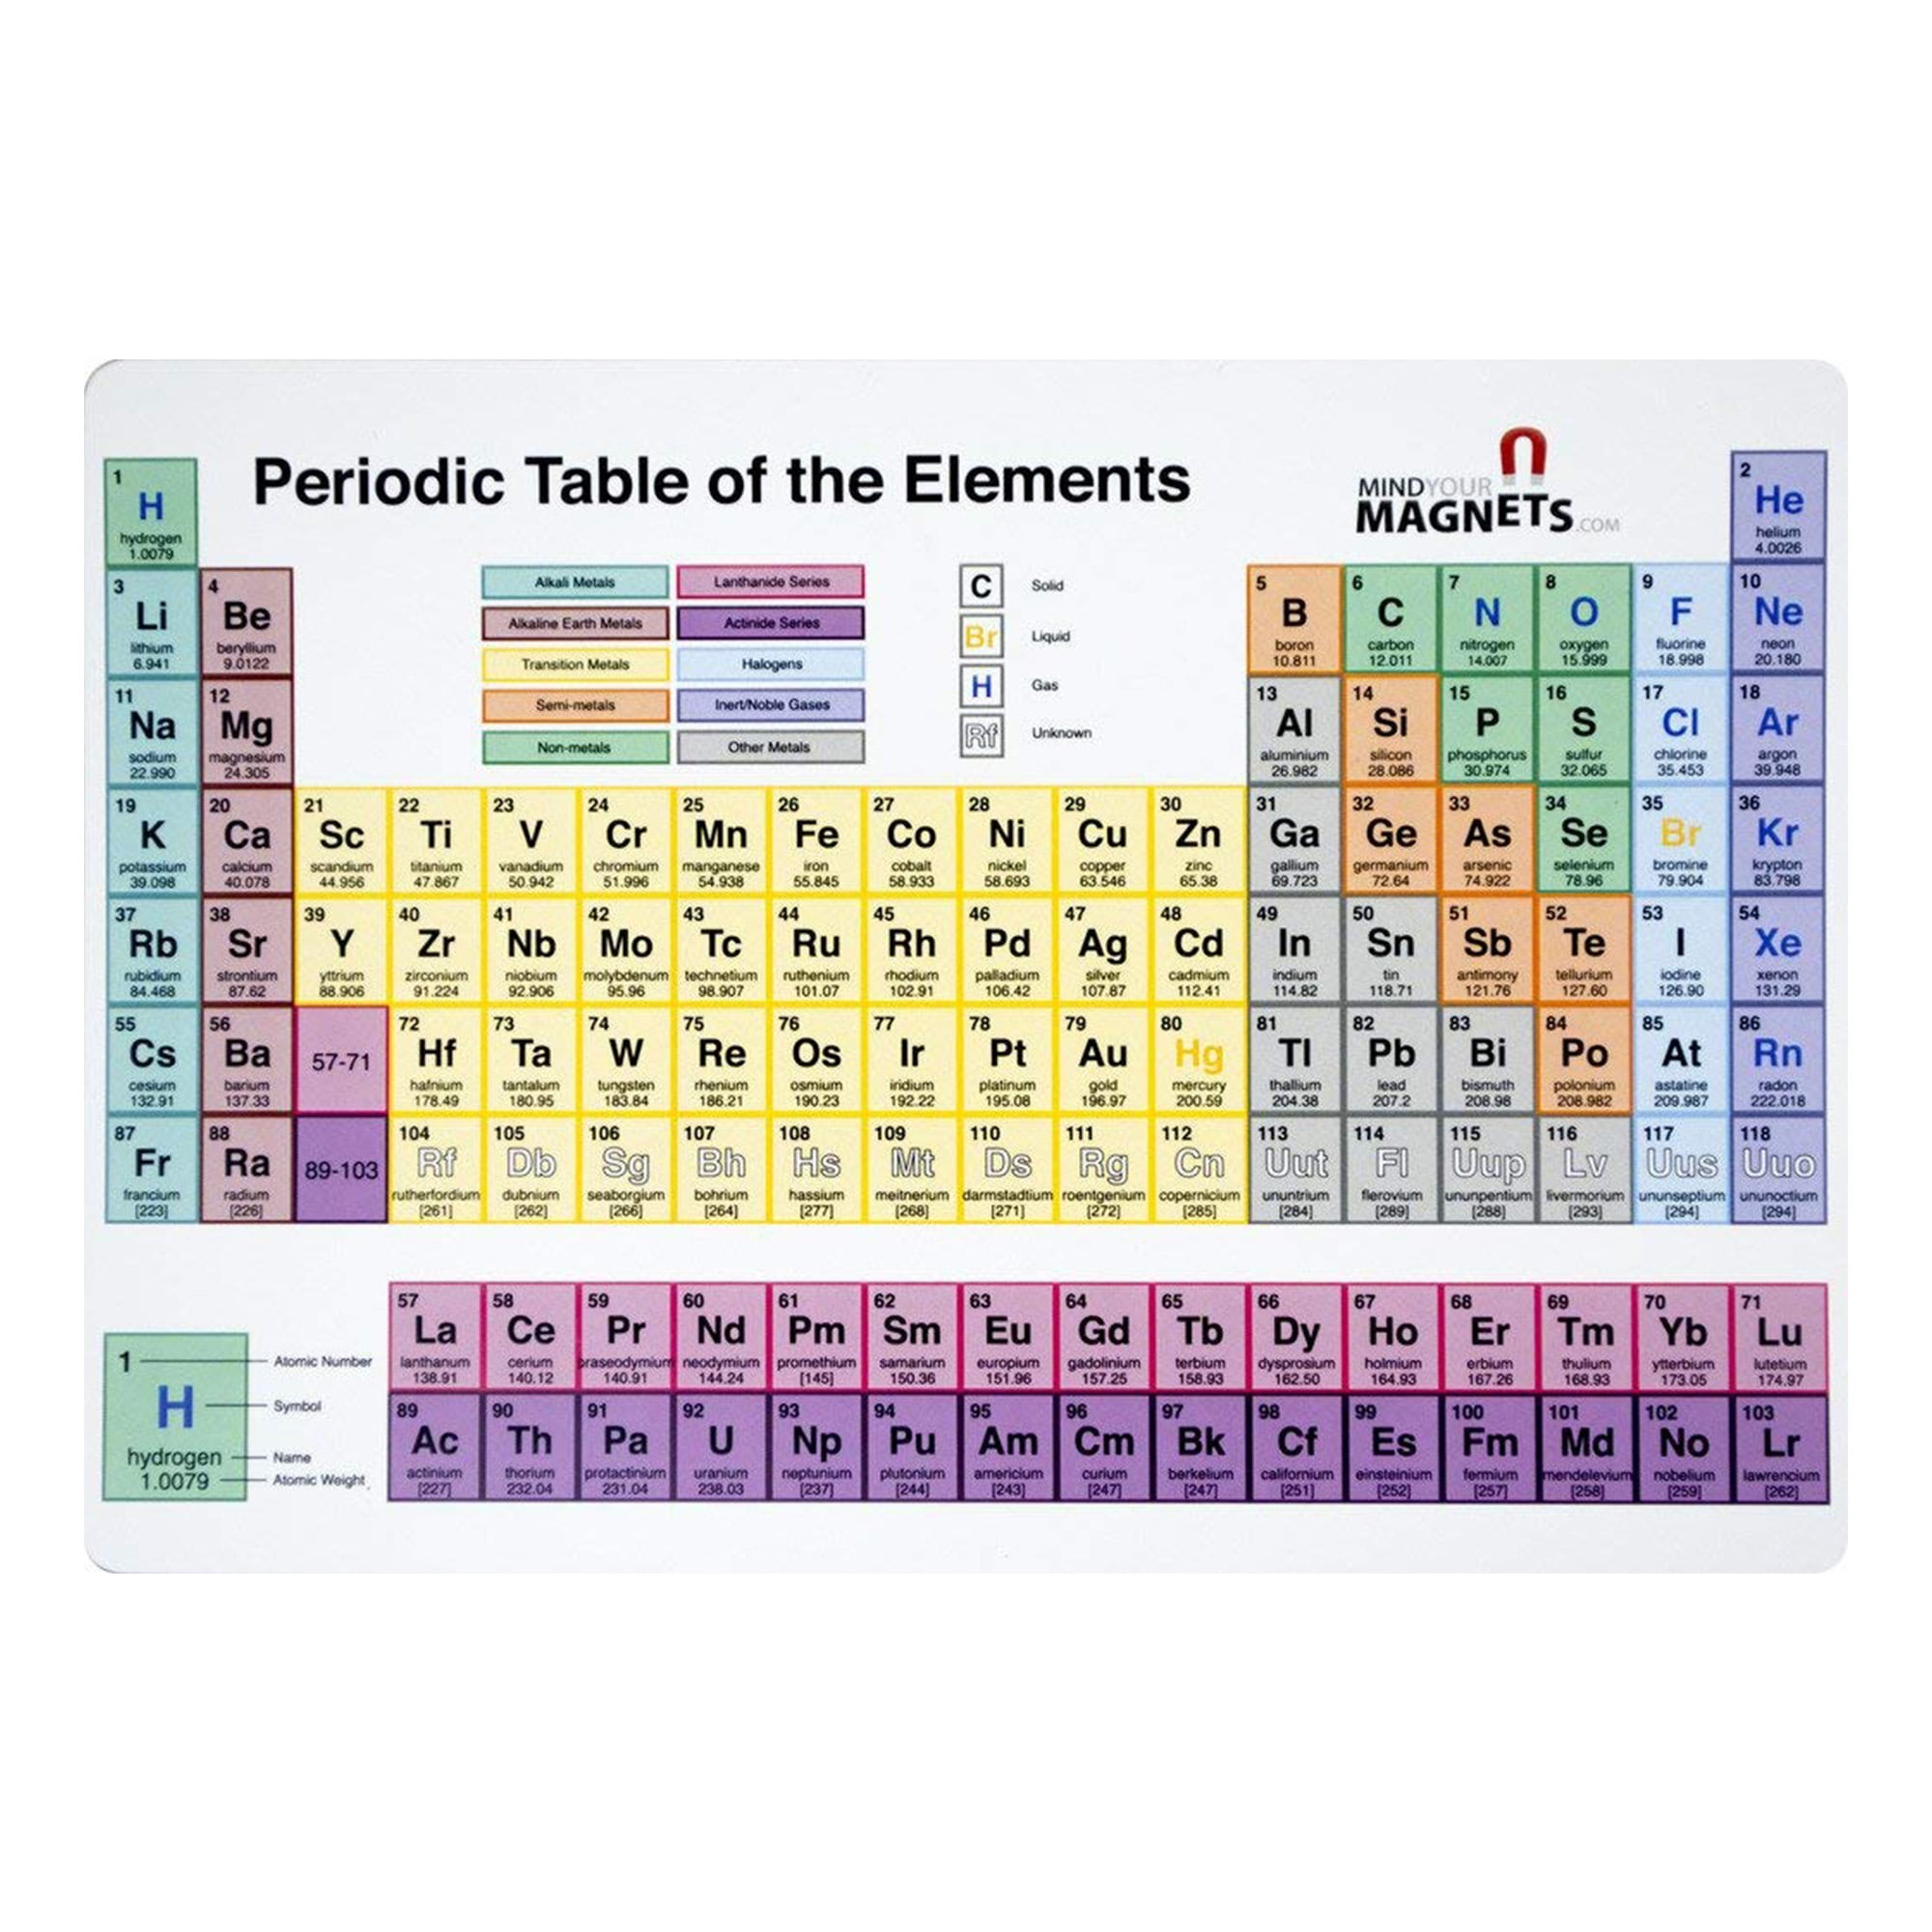 Periodic table of elements - photopna